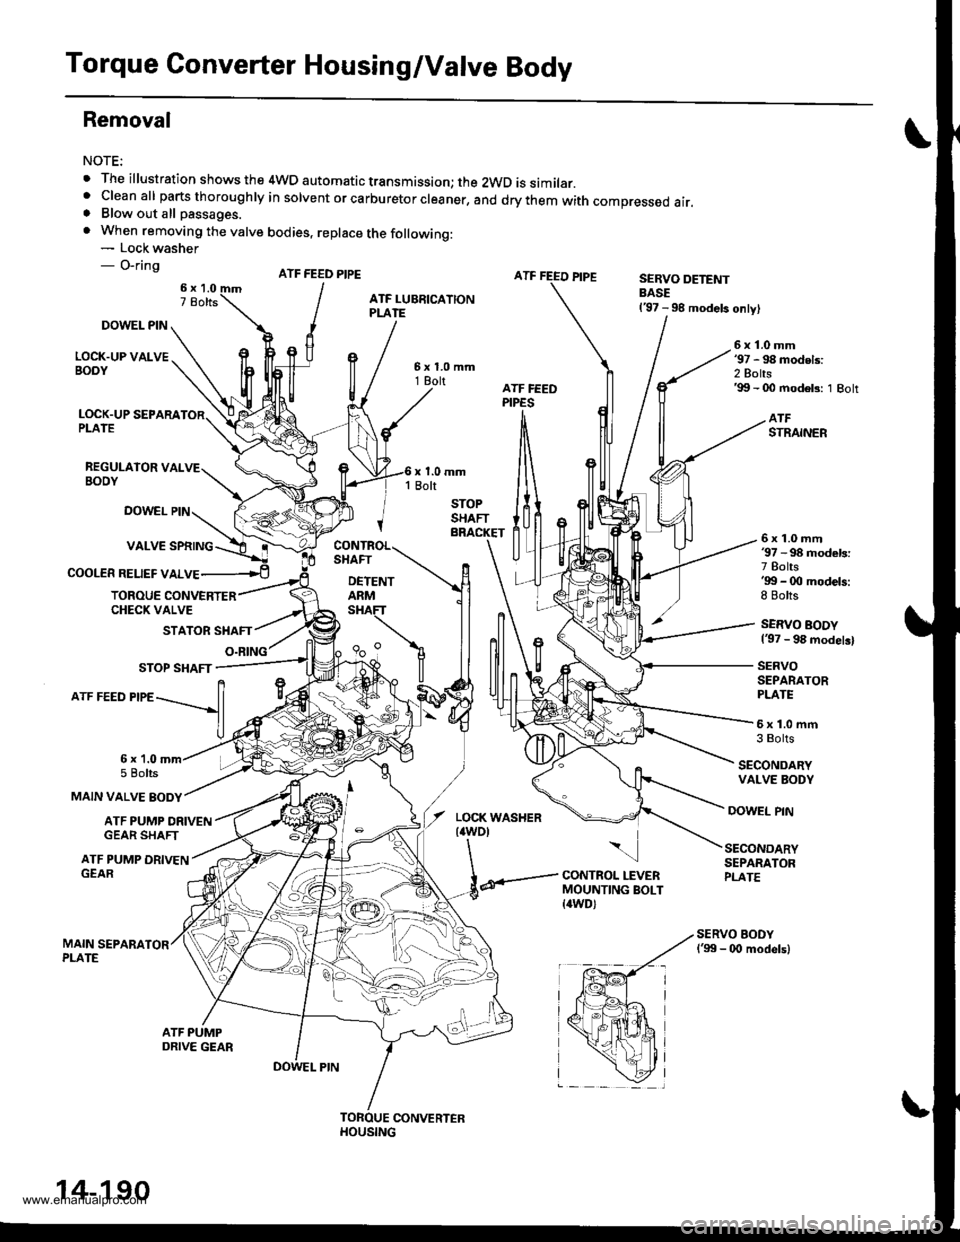 HONDA CR-V 1998 RD1-RD3 / 1.G Service Manual 
Torque Converter Housing/Valve Body
Removal
NOTE:
. The illustration shows the 4WD automatic transmission; the 2WD is similar. cleanall parts thoroughry in sorvent or carburetor creaner, and drythem